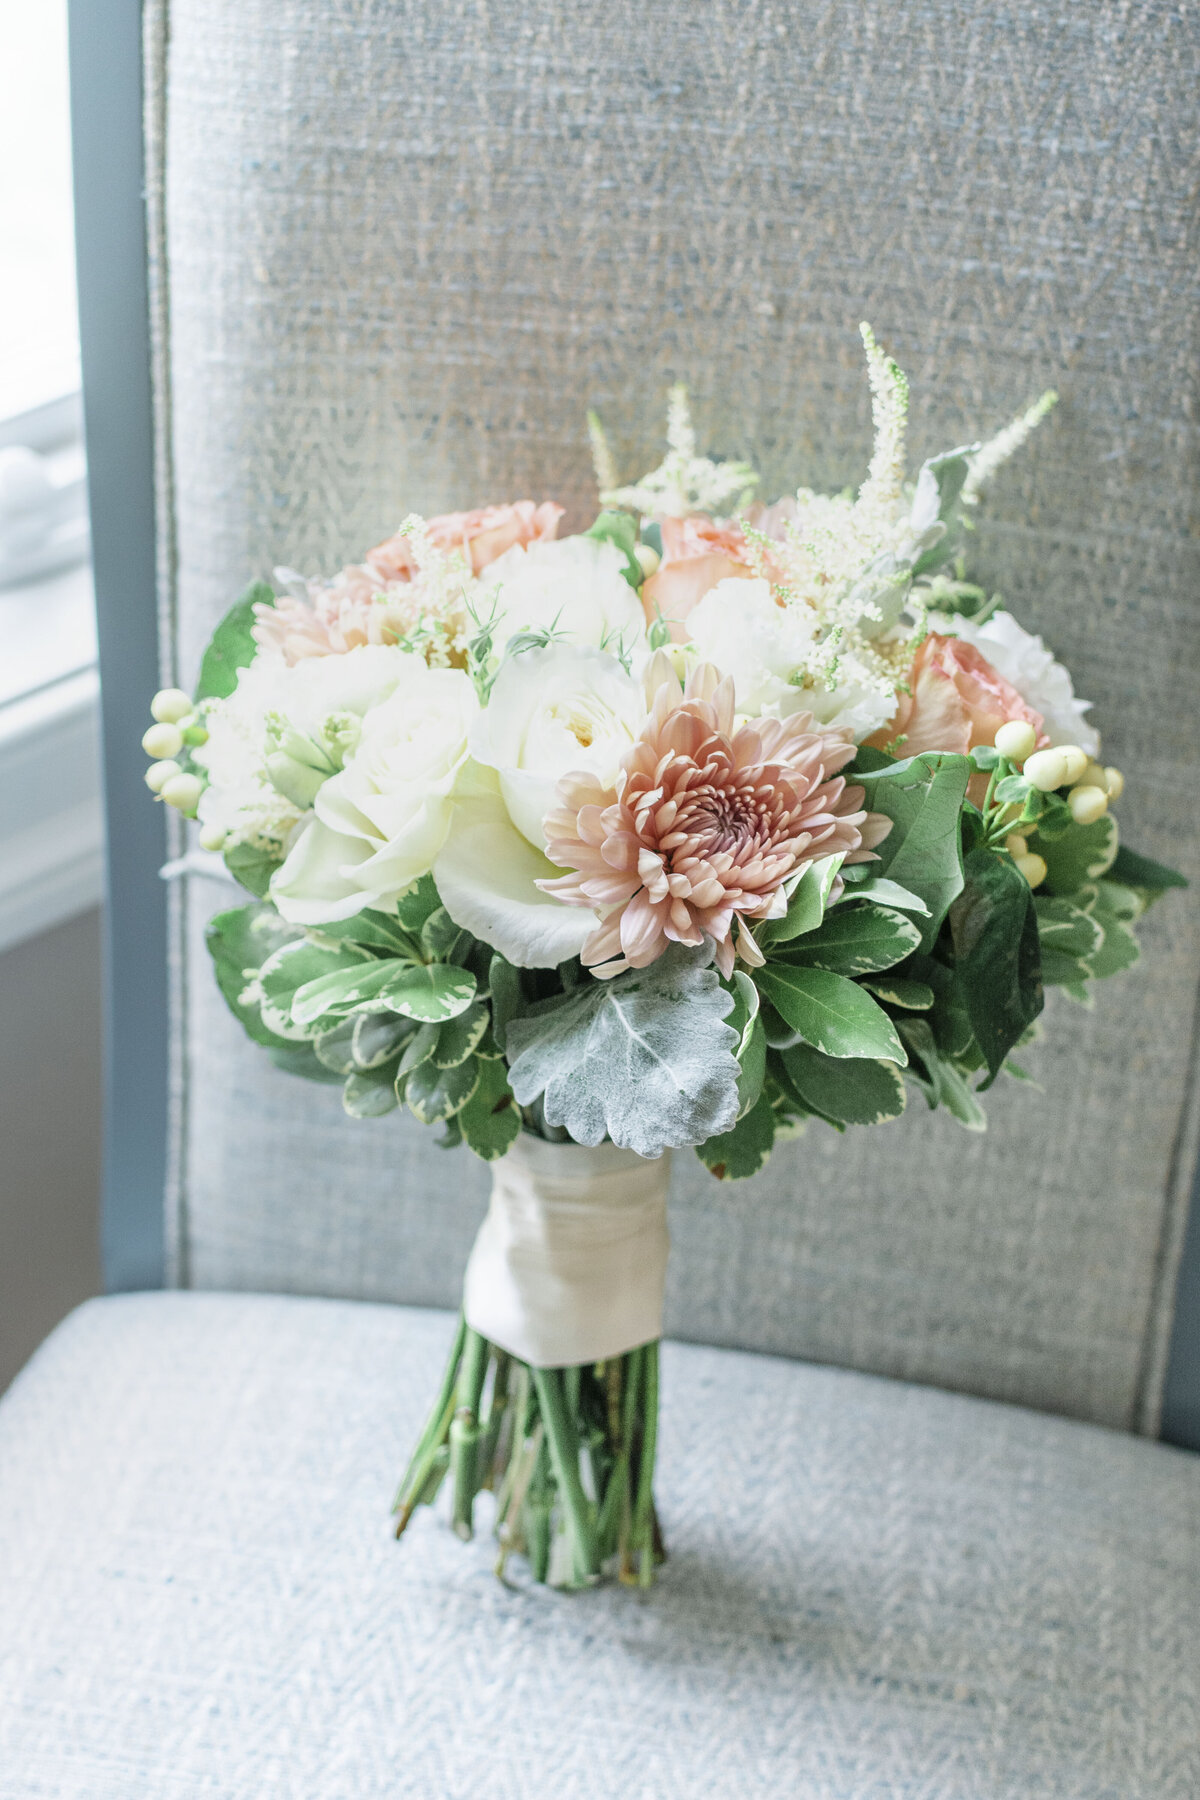 Blush colored spring bouquet